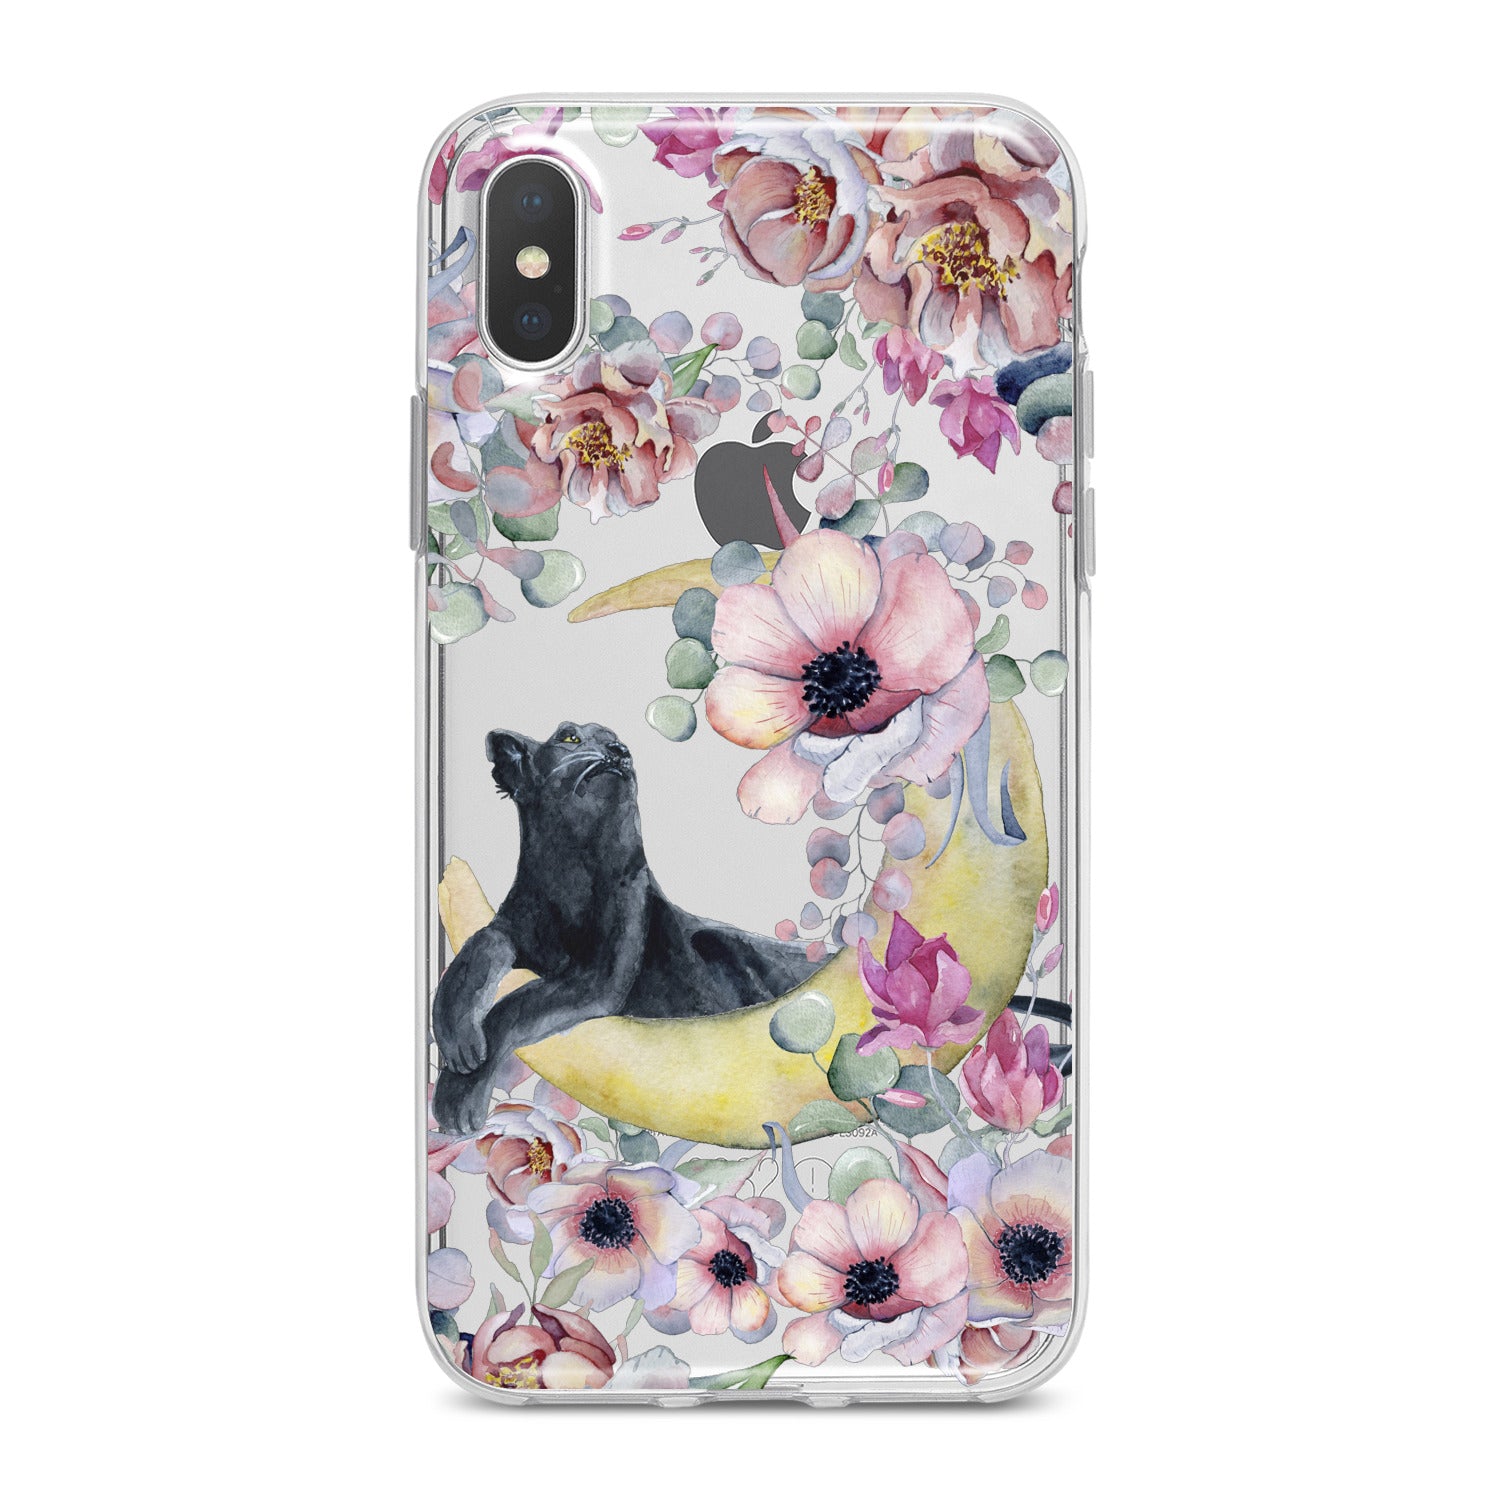 Lex Altern Floral Puma Phone Case for your iPhone & Android phone.